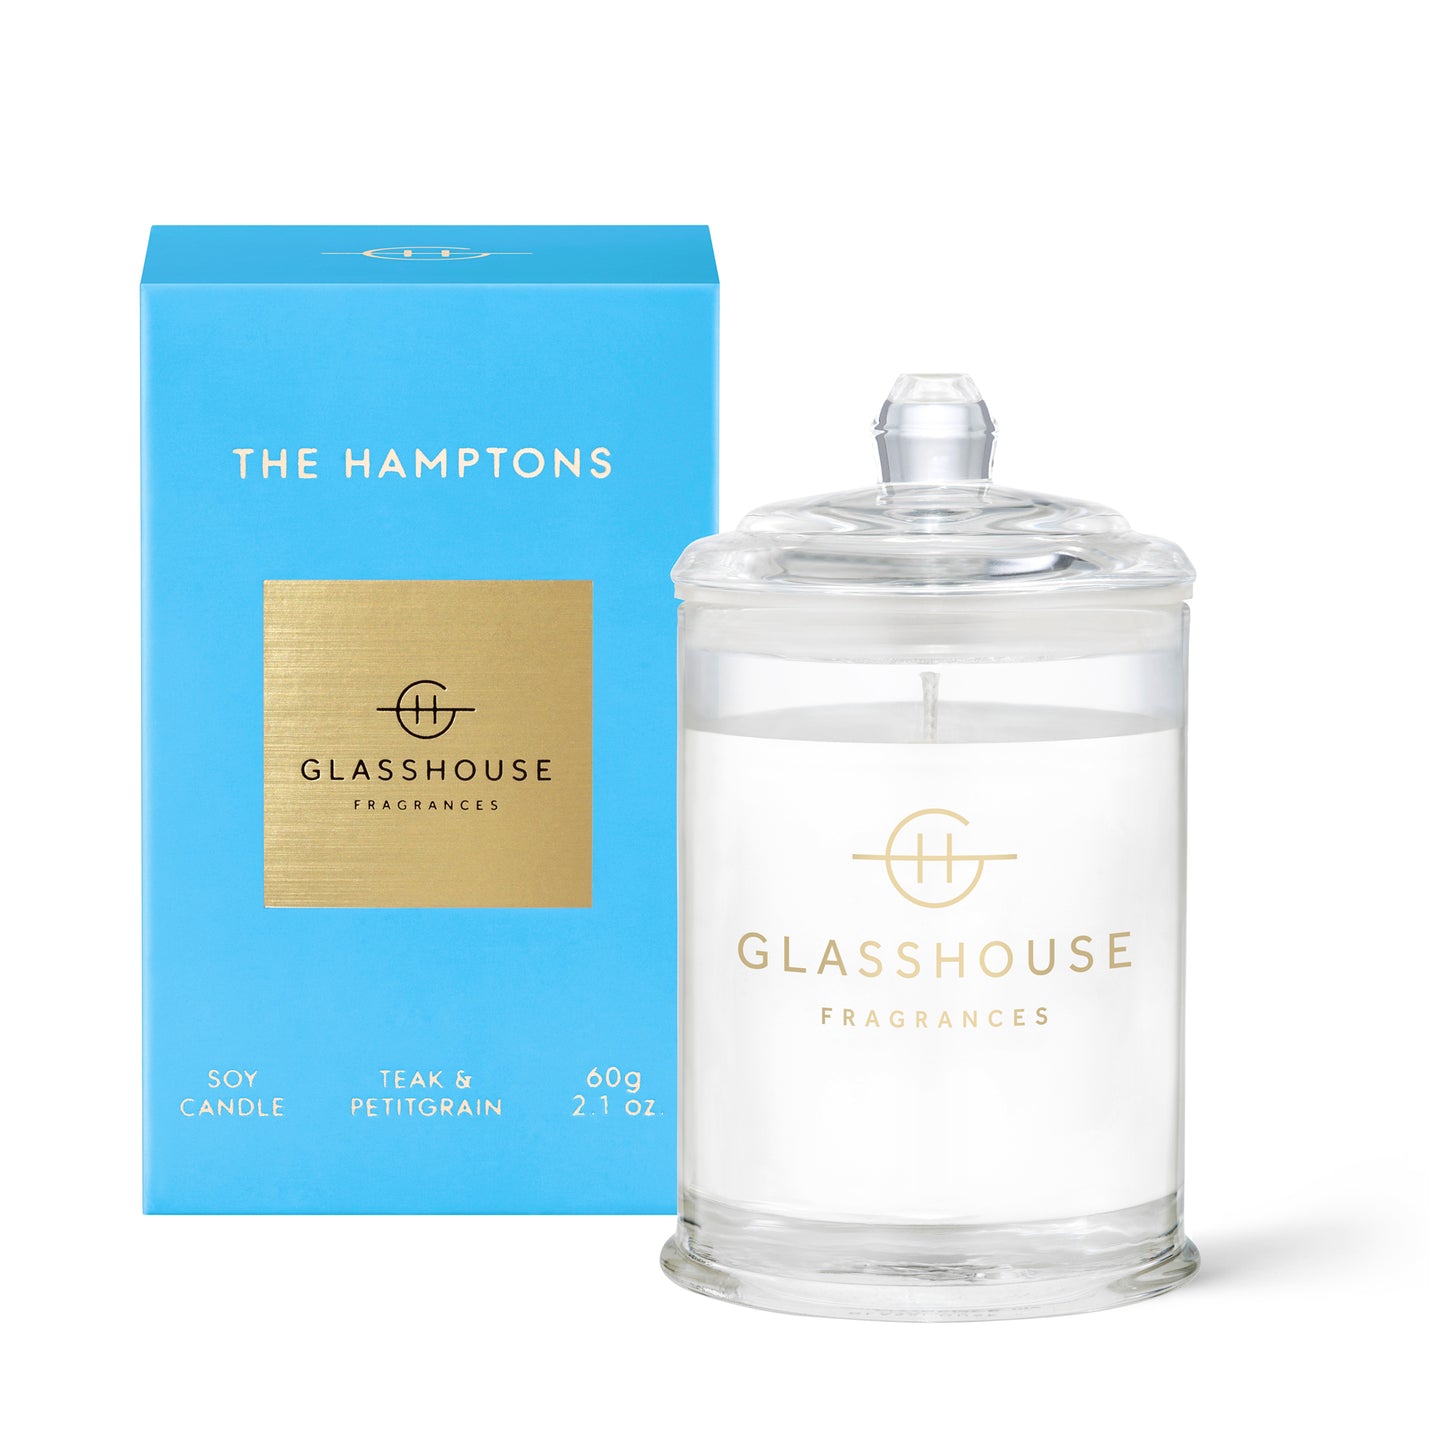 The Hamptons by Glasshouse. 60g-Soy-Candle